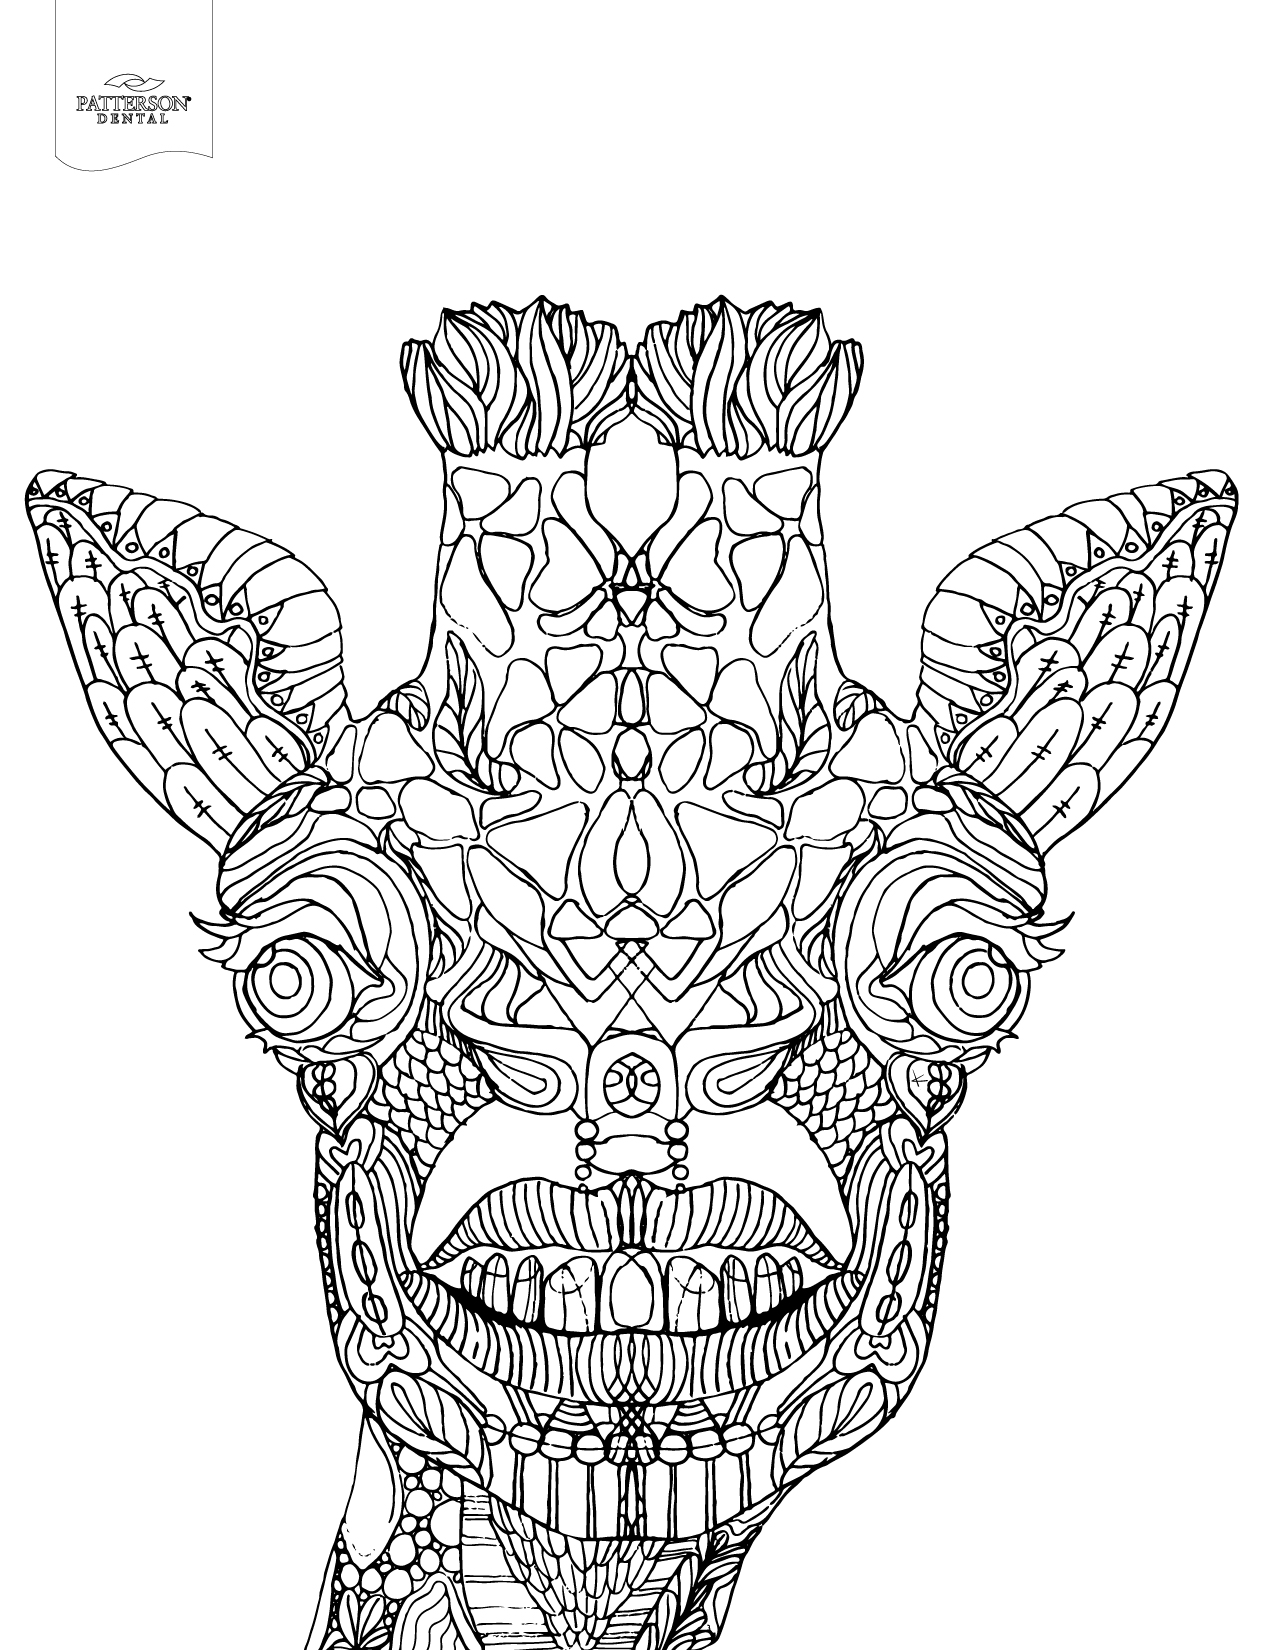 coloring giraffe adult printable animal advanced adults toothy colouring sheets books radiology cusp offthecusp dental template patterson version everfreecoloring templates